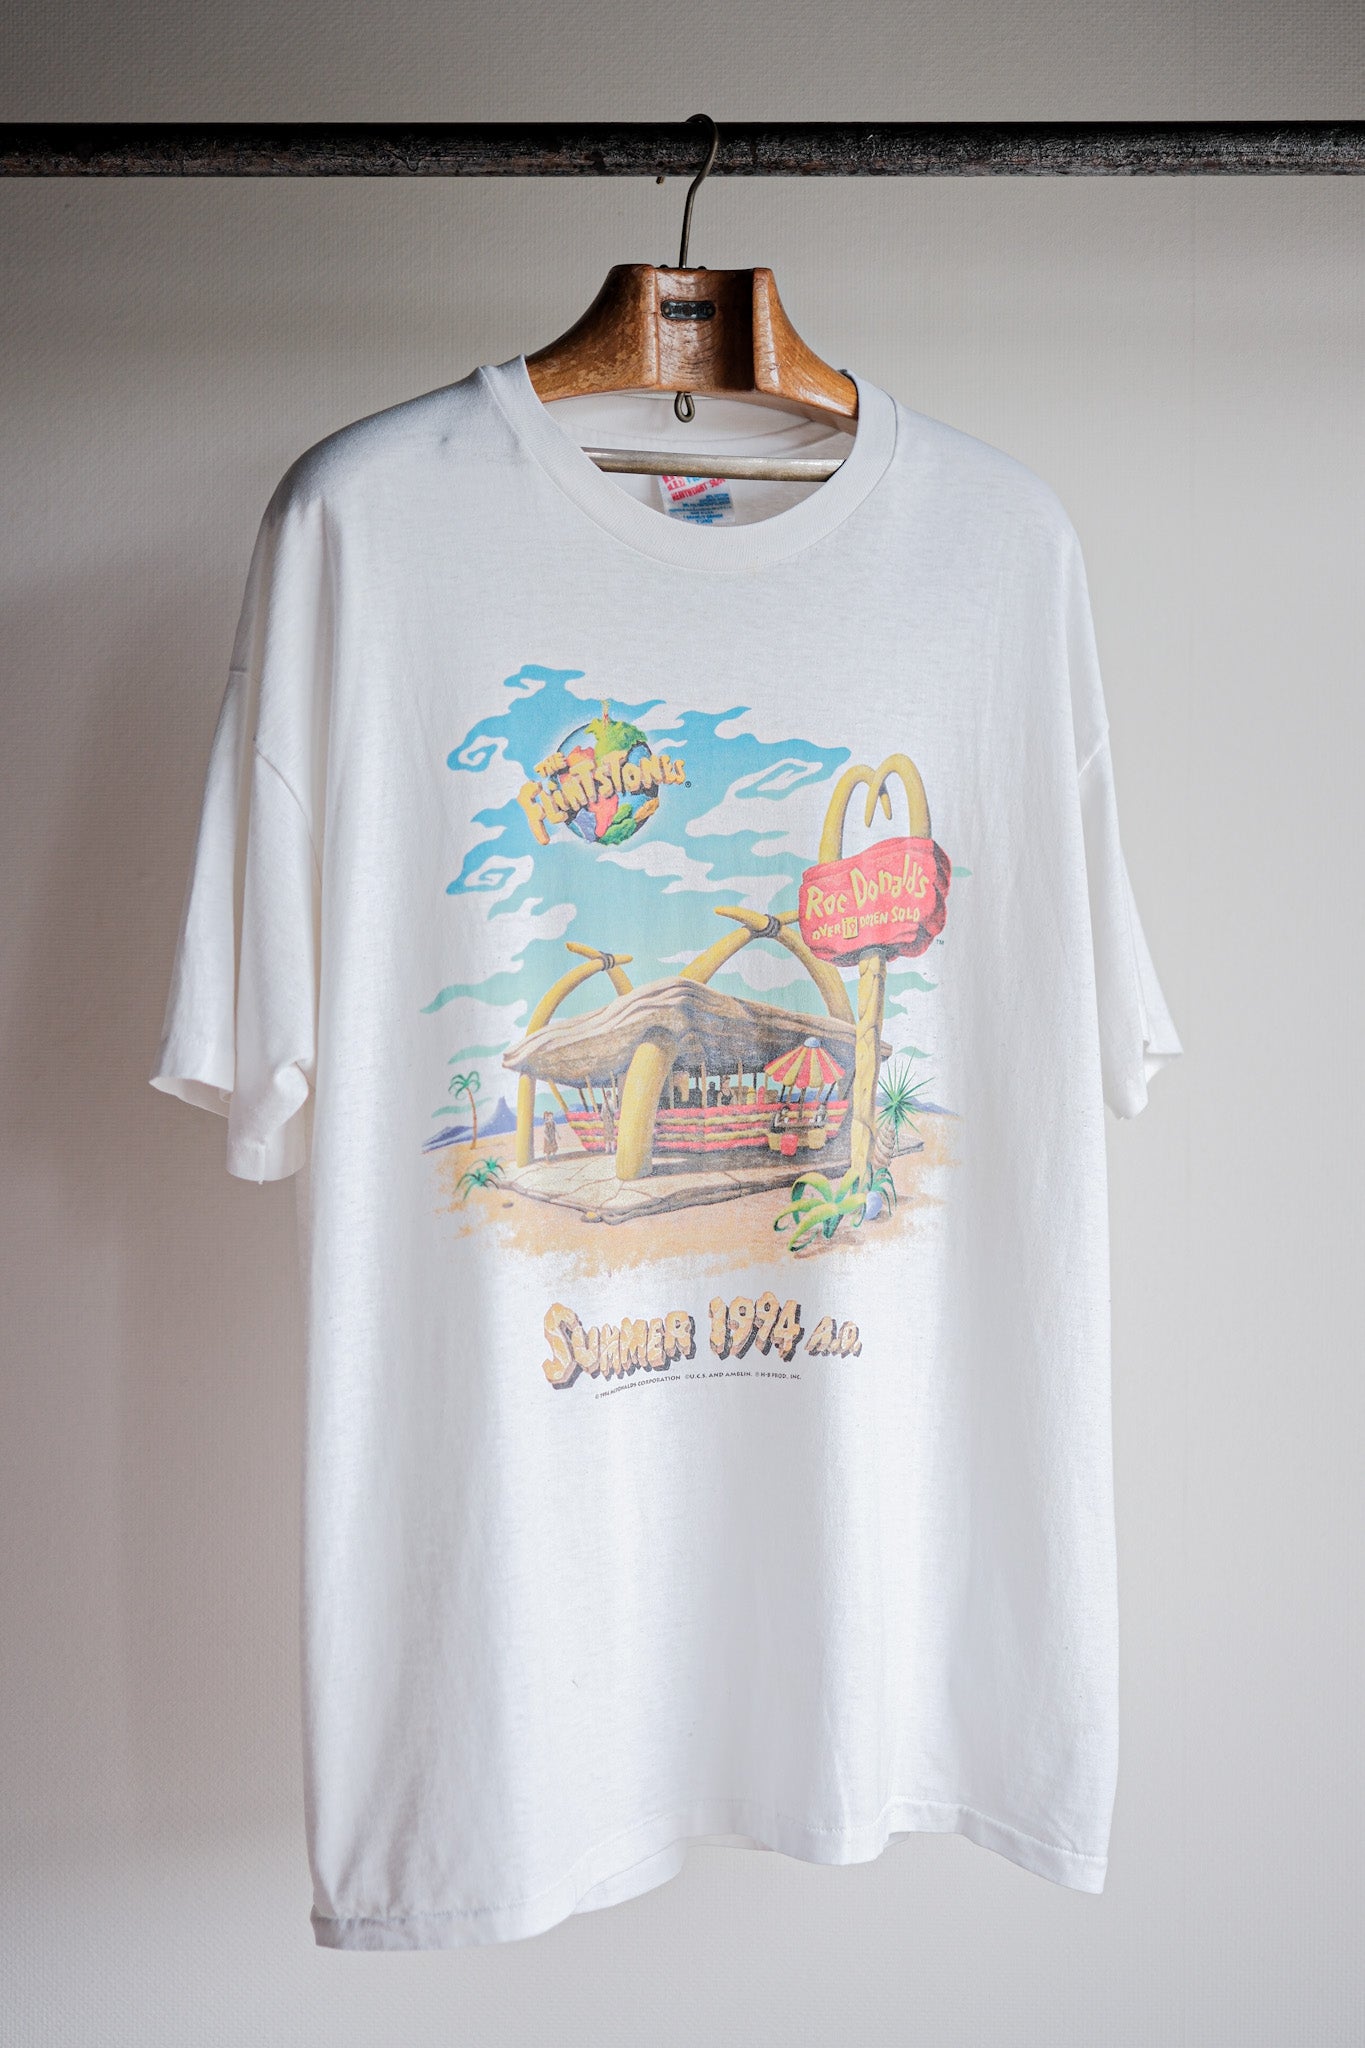 【~90's】Vintage Movie Print T-shirt Size.XL "The Flintstones" "Made in U.S.A."